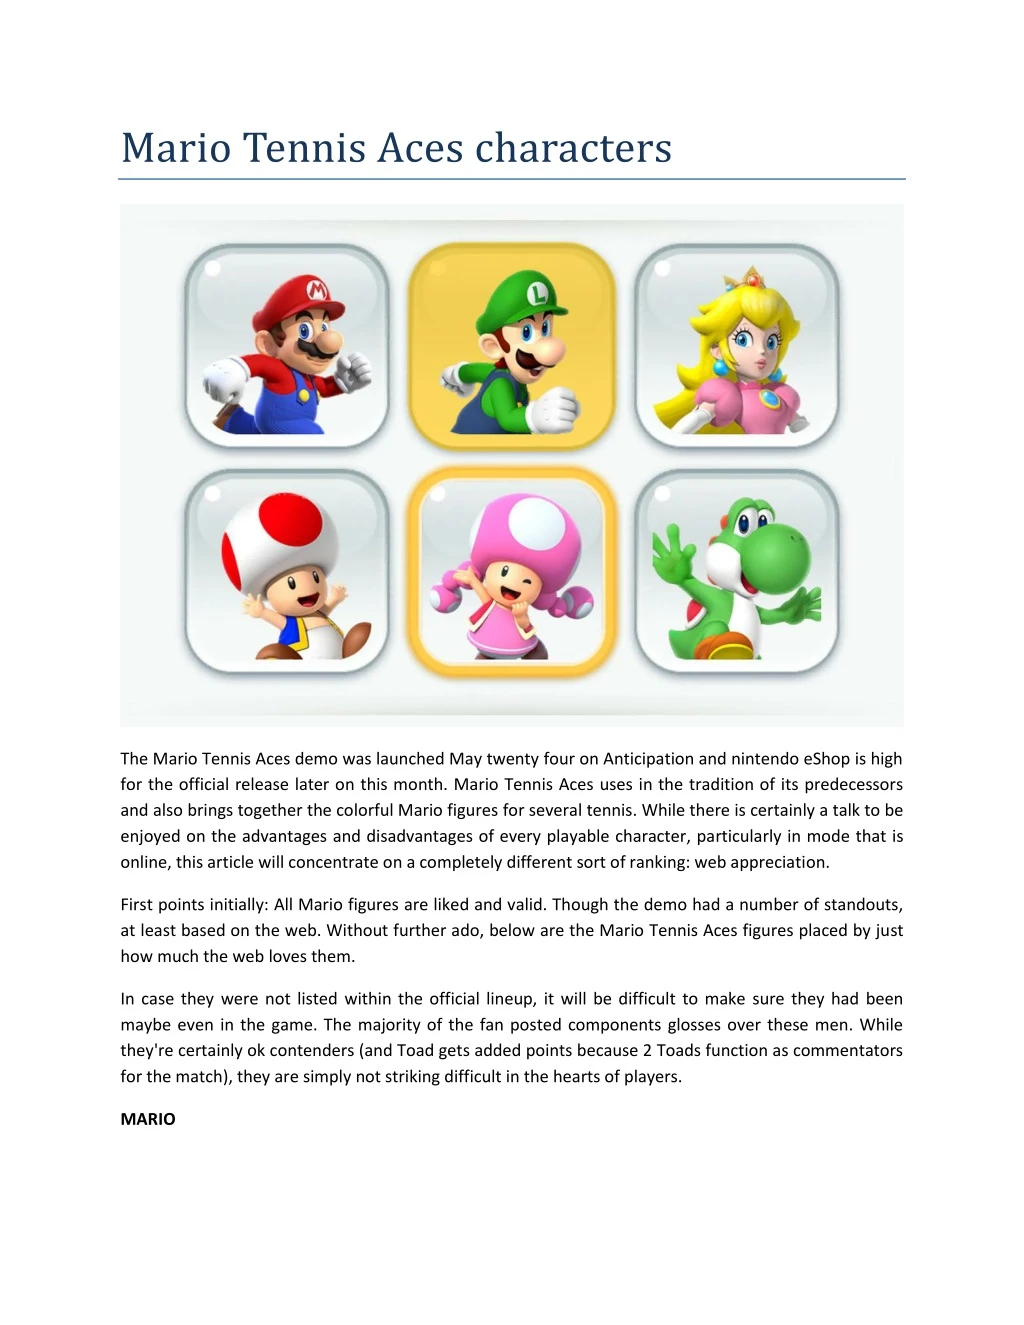 mario tennis aces characters